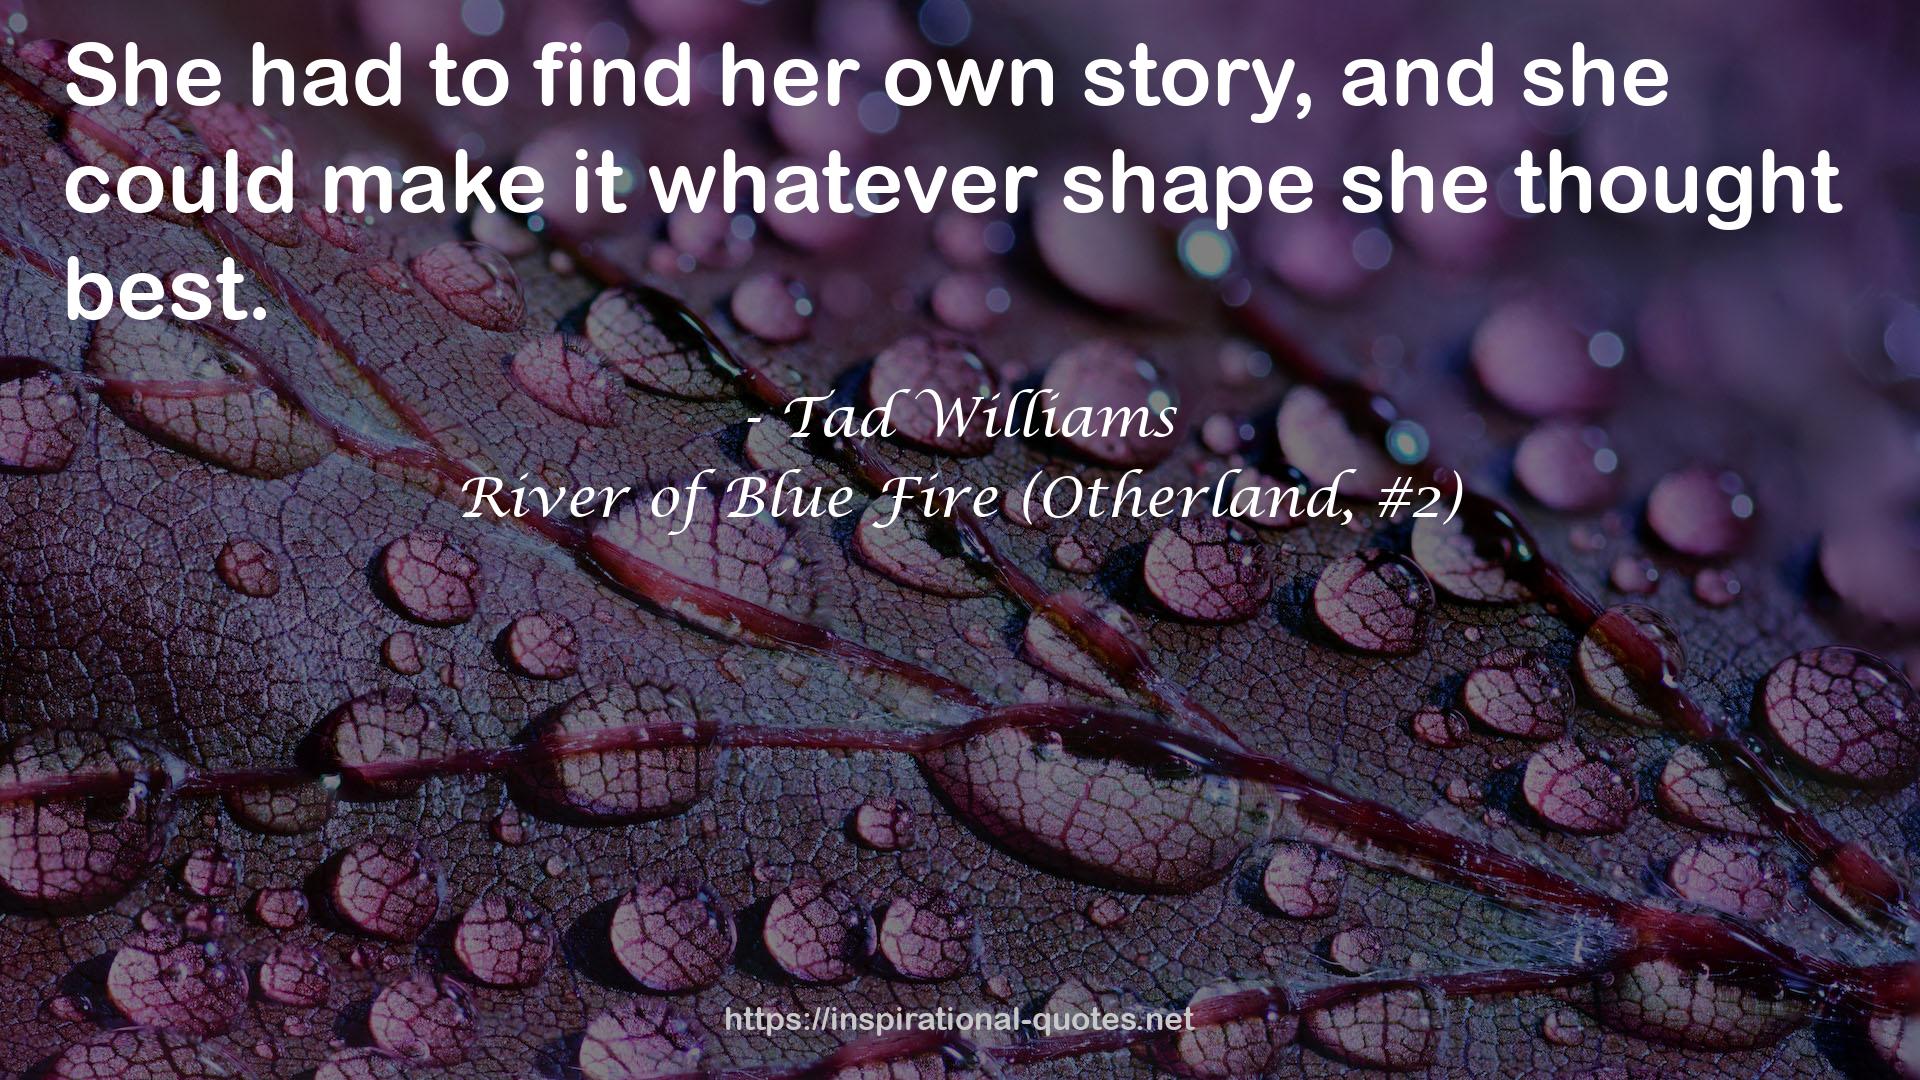 River of Blue Fire (Otherland, #2) QUOTES